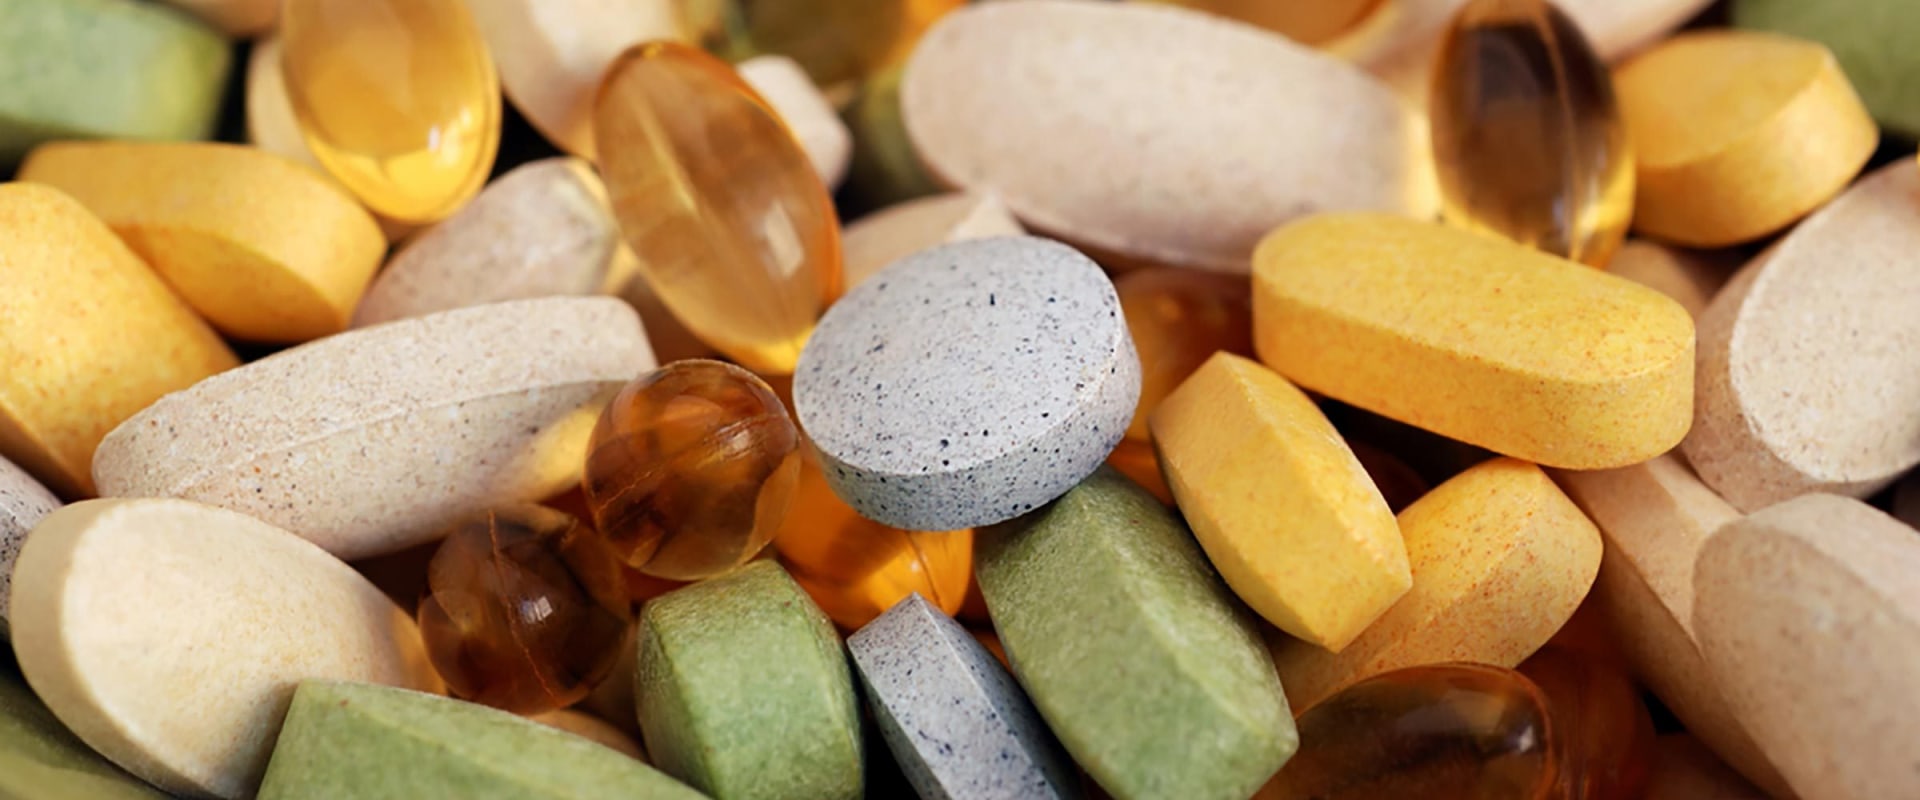 The Ultimate Guide to Taking Vitamins and Supplements